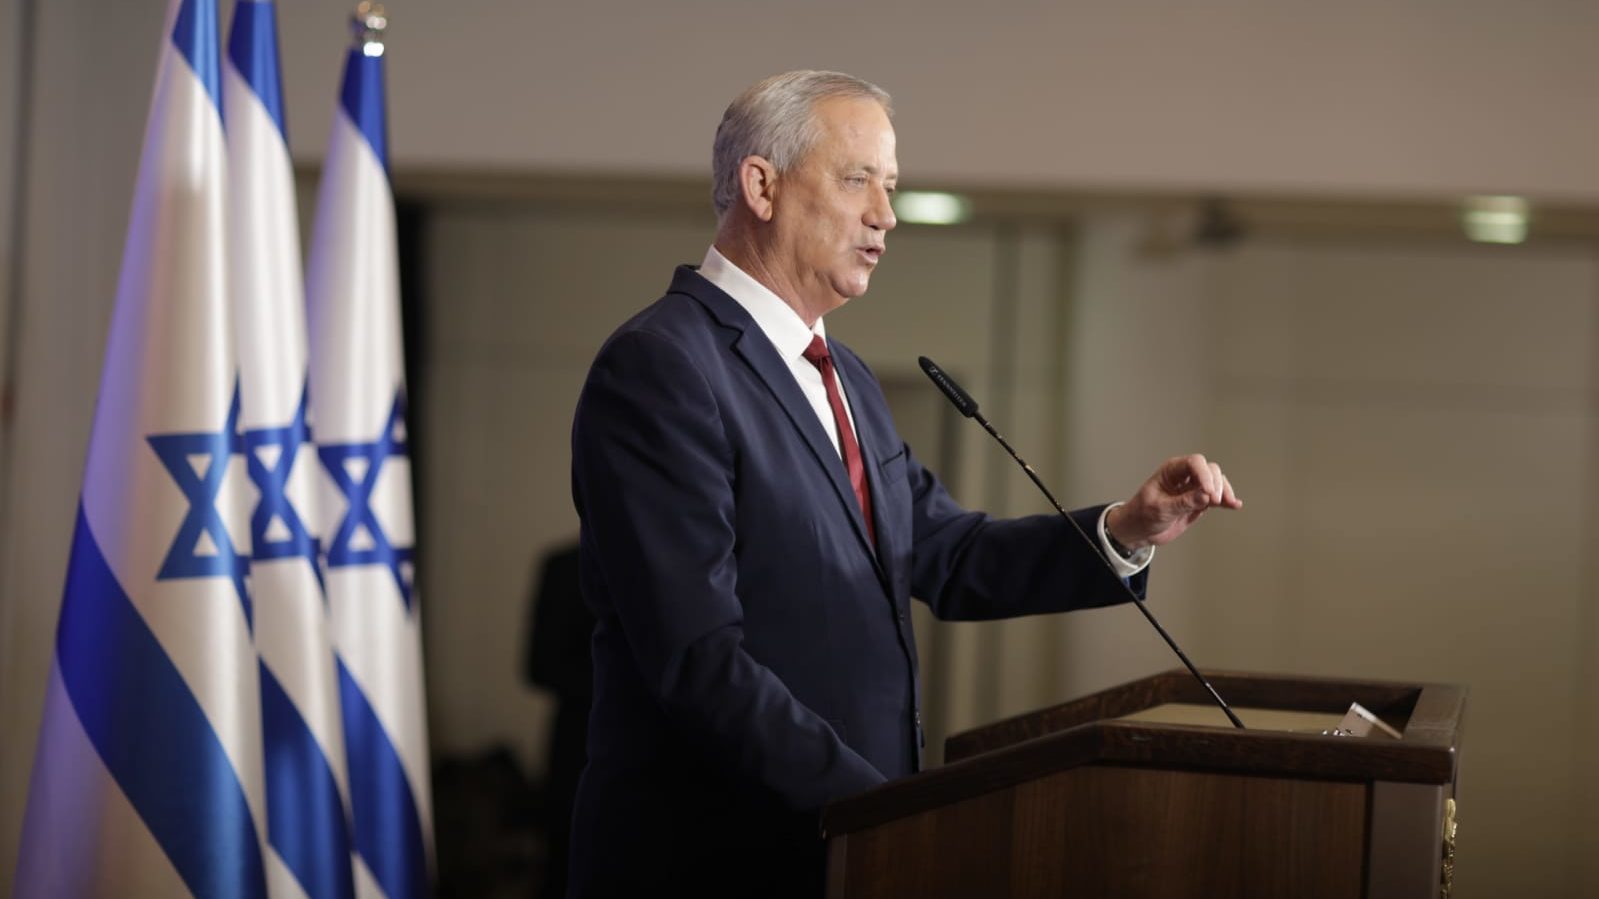 Knesset Pushes Self-Destruct Button, Making New Elections a Near Certainty